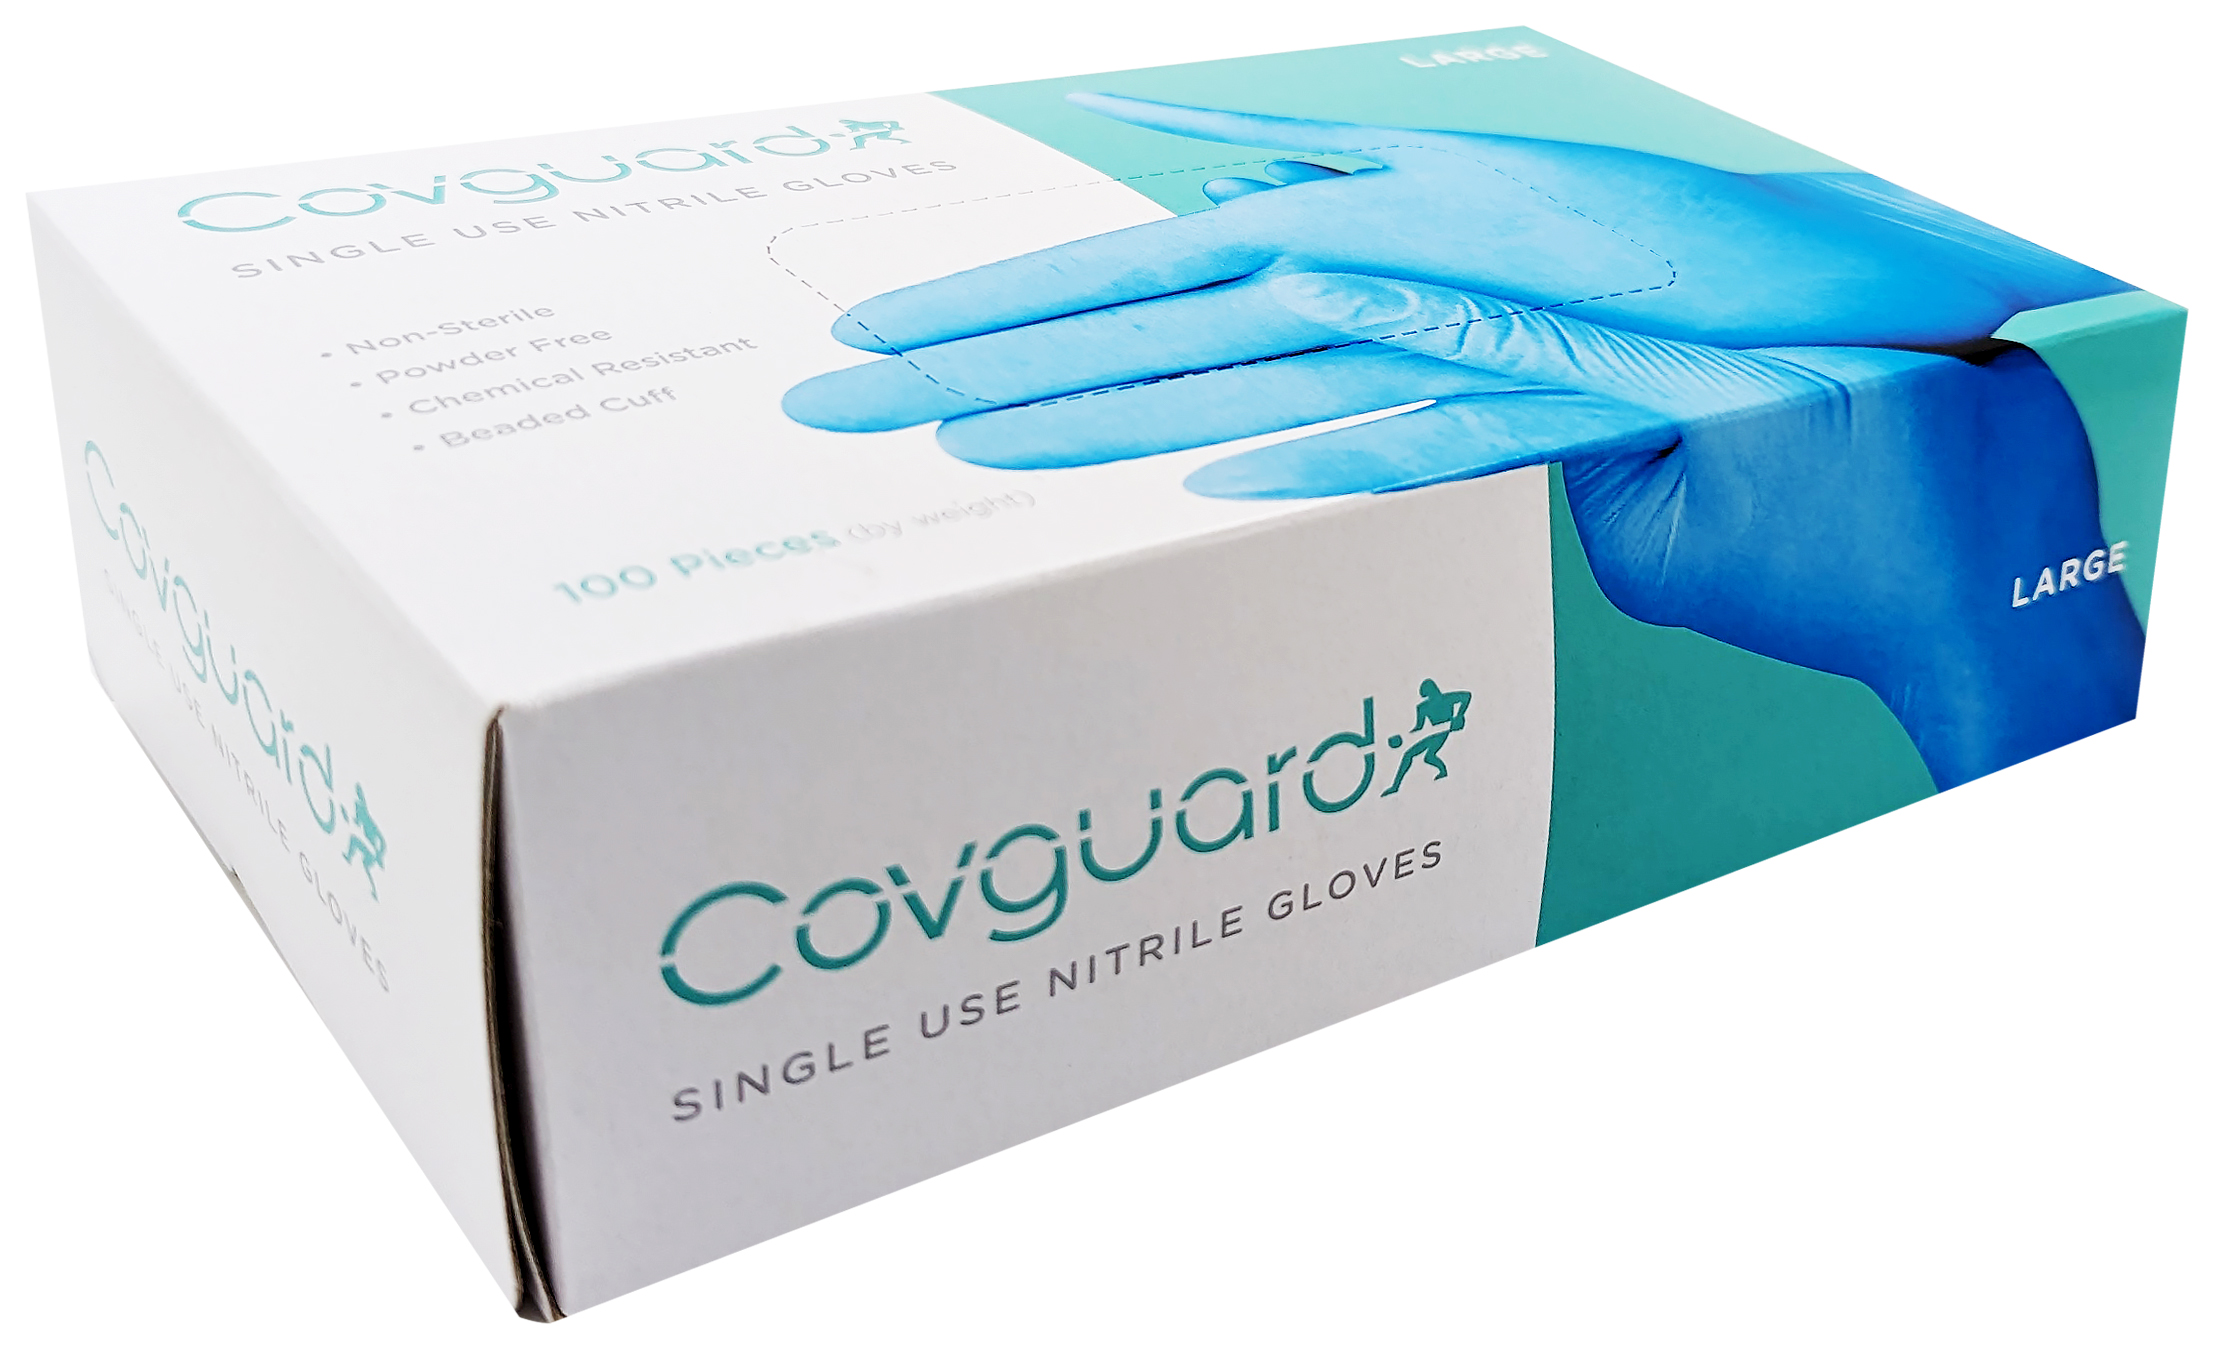 Image of Covguard Nitrile Blue Powder Free Disposable Glove - Box of 100